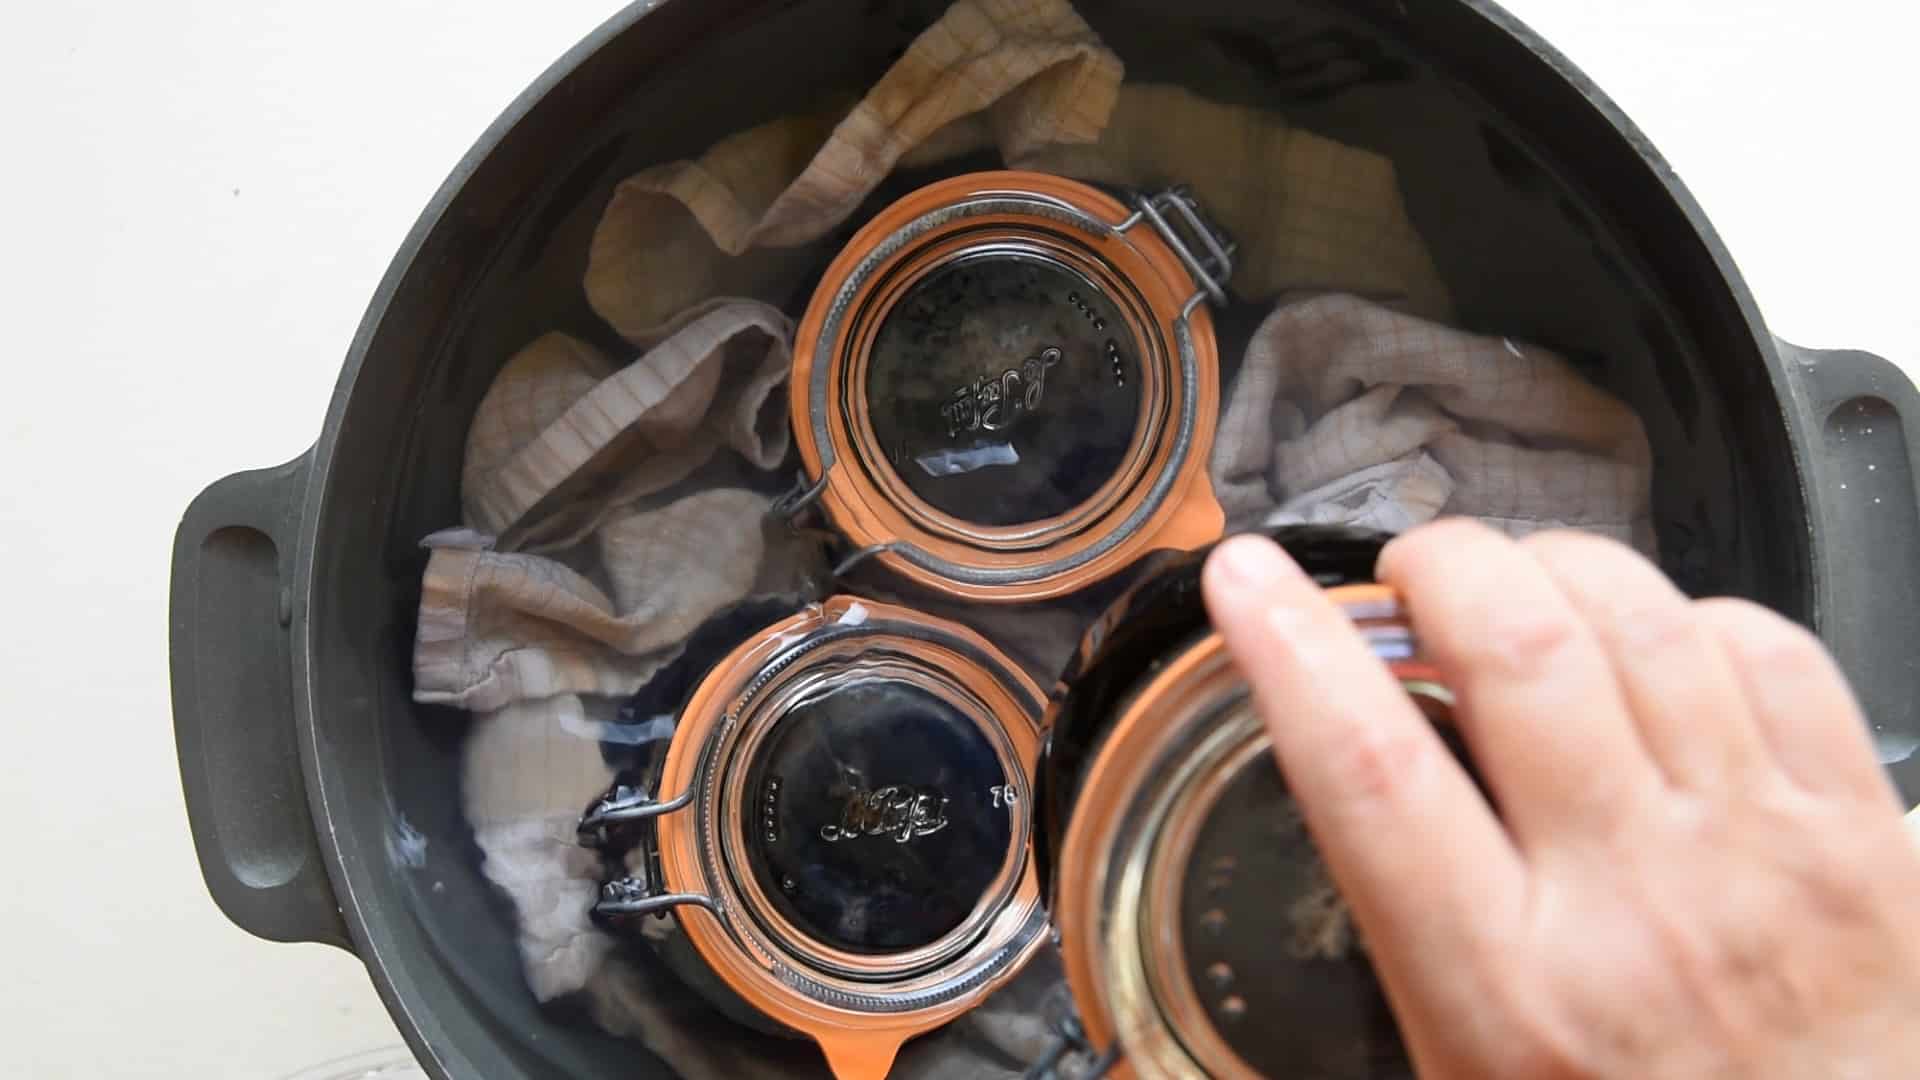 removing the jars from the pan